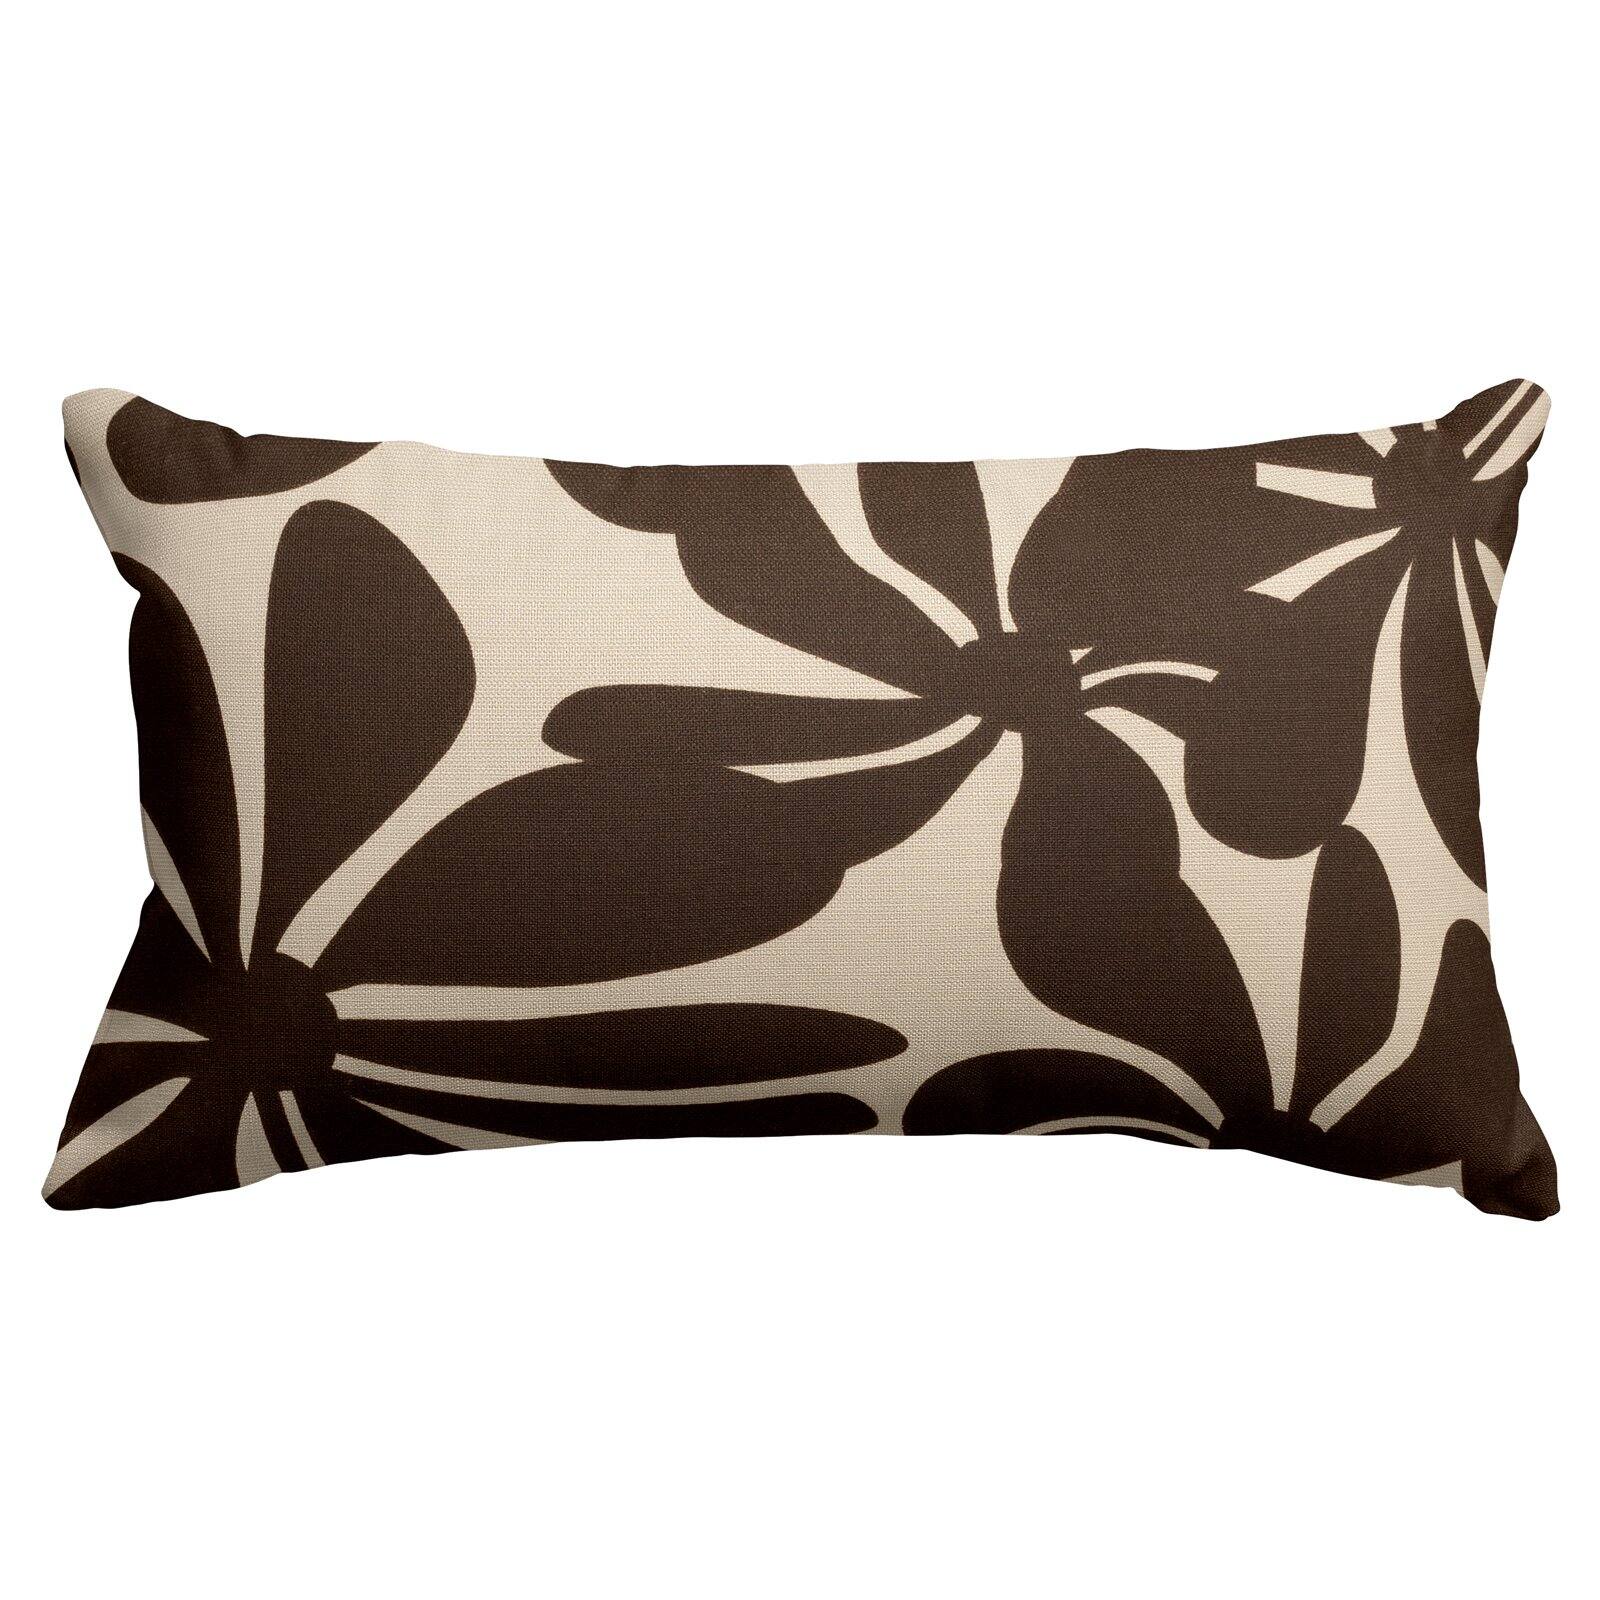 Majestic Home Goods Plantation Indoor / Outdoor Small Pillow - image 2 of 5